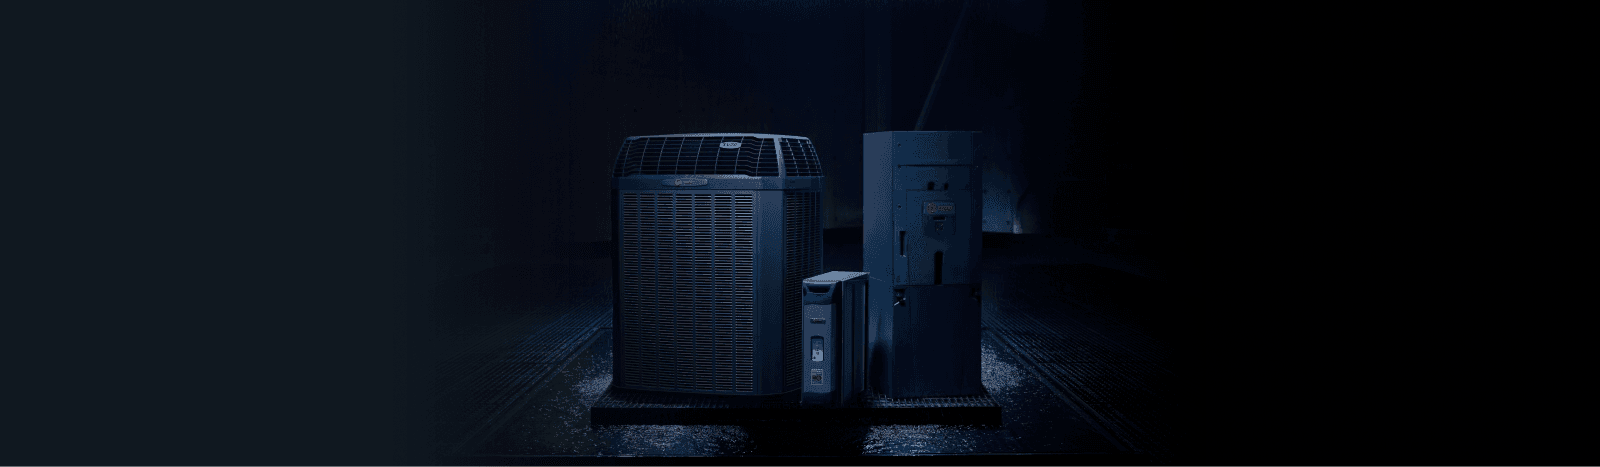 The Trane XV20i HVAC unit and related products are displayed against a dark background.